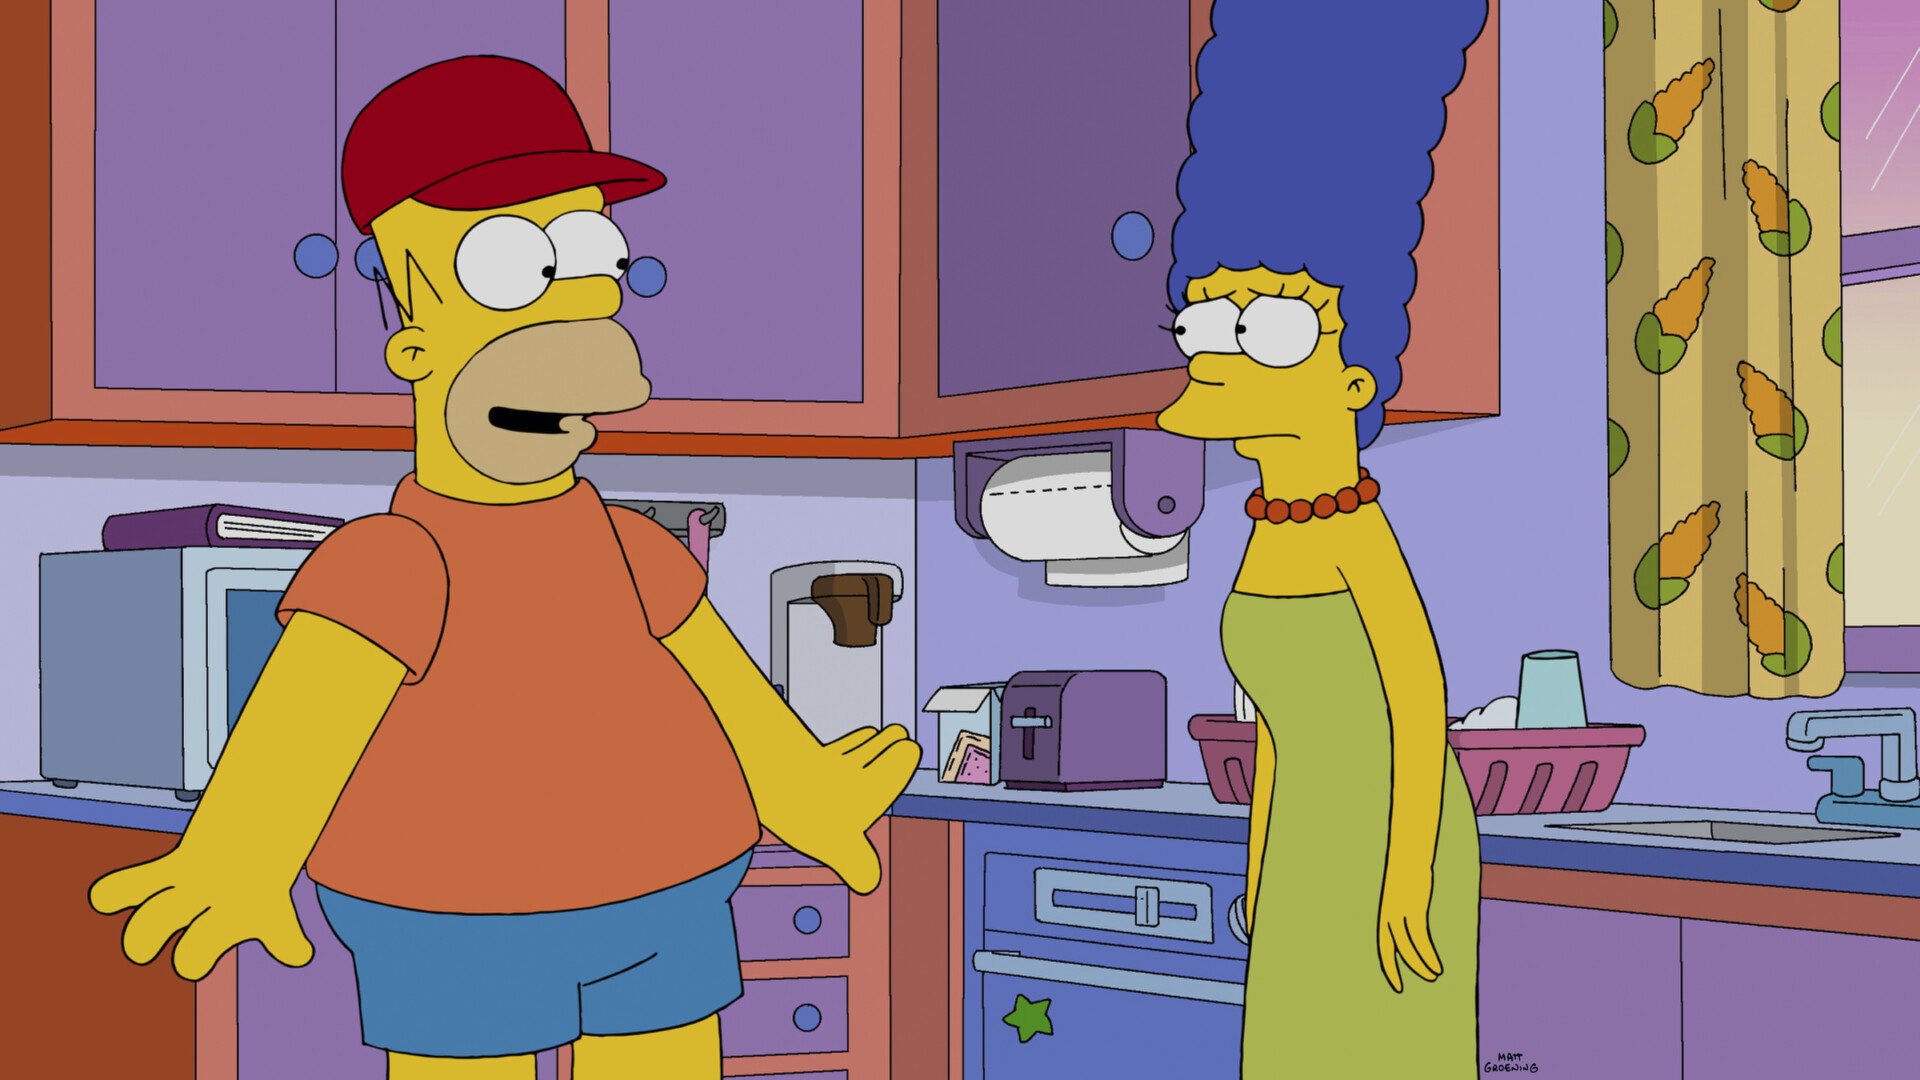 The Simpsons: Marge Must Adapt To A New Homer After He Is Hypnotized At The Circus And Believes He Is A Young Boy Again In The All-New &Quot;Bart'S New Friend&Quot; Episode Of The Simpsons Airing Sunday, Jan. 11 (8:00-8:30 Pm Et/Pt) On Fox. The Simpsons ª And © 2014 Tcffc All Rights Reserved.